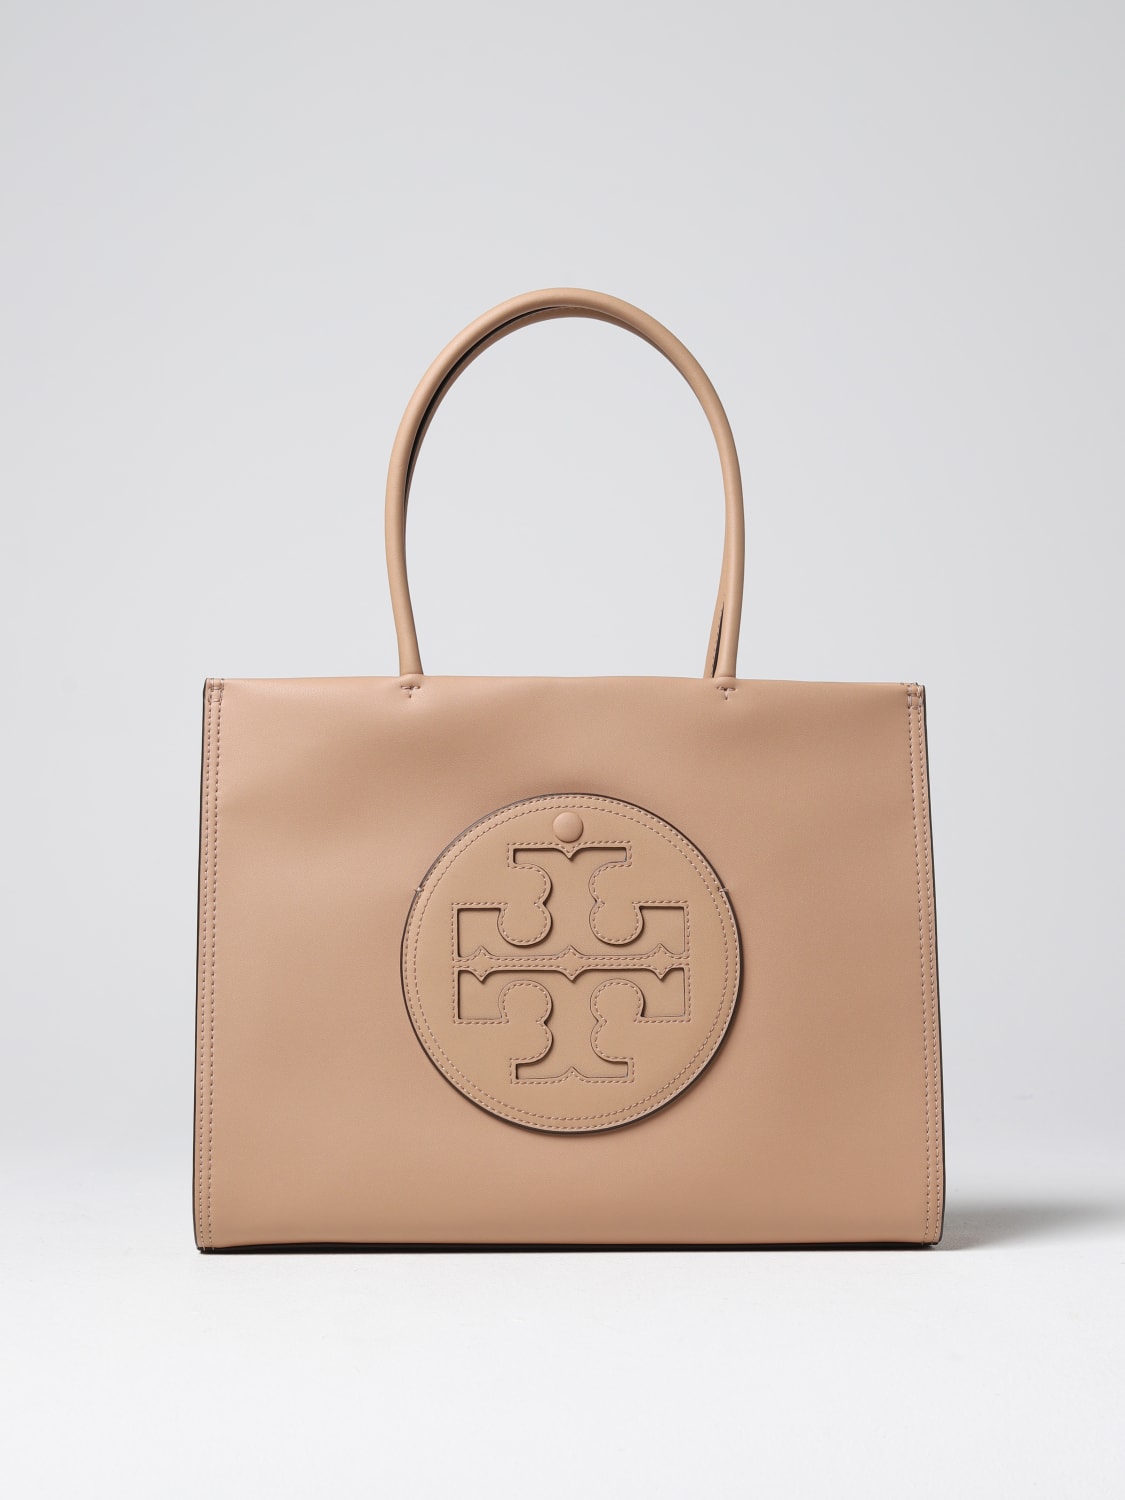 Tory Burch Ella Bag in Synthetic Leather